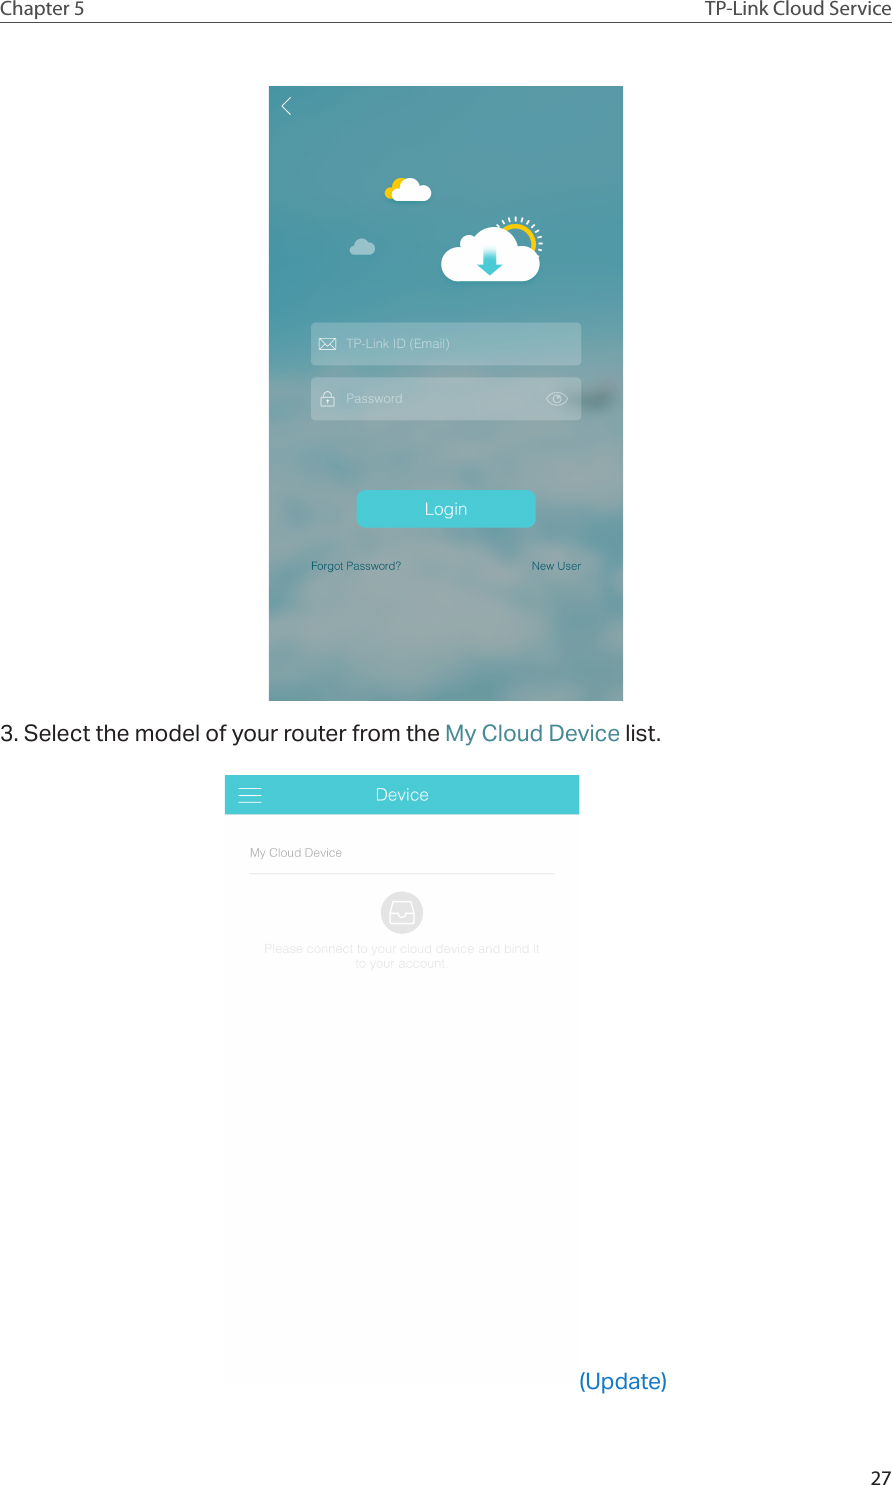 27Chapter 5 TP-Link Cloud Service3. Select the model of your router from the My Cloud Device list.(Update)